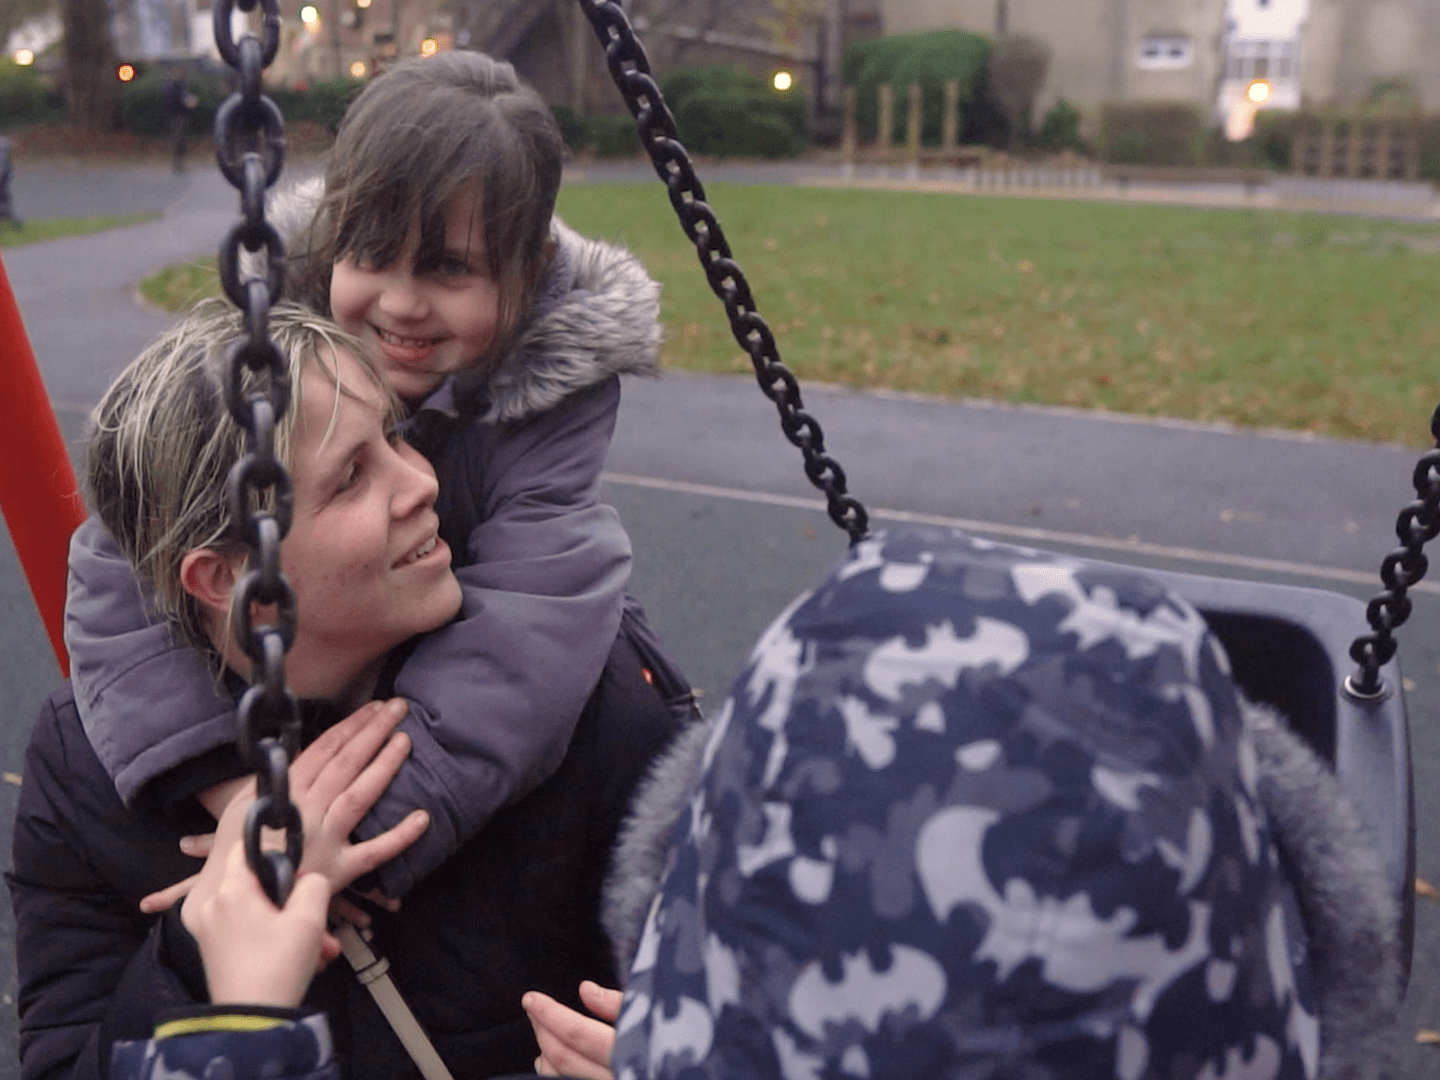 little girl hugging her mum on a swing in a playground in winter